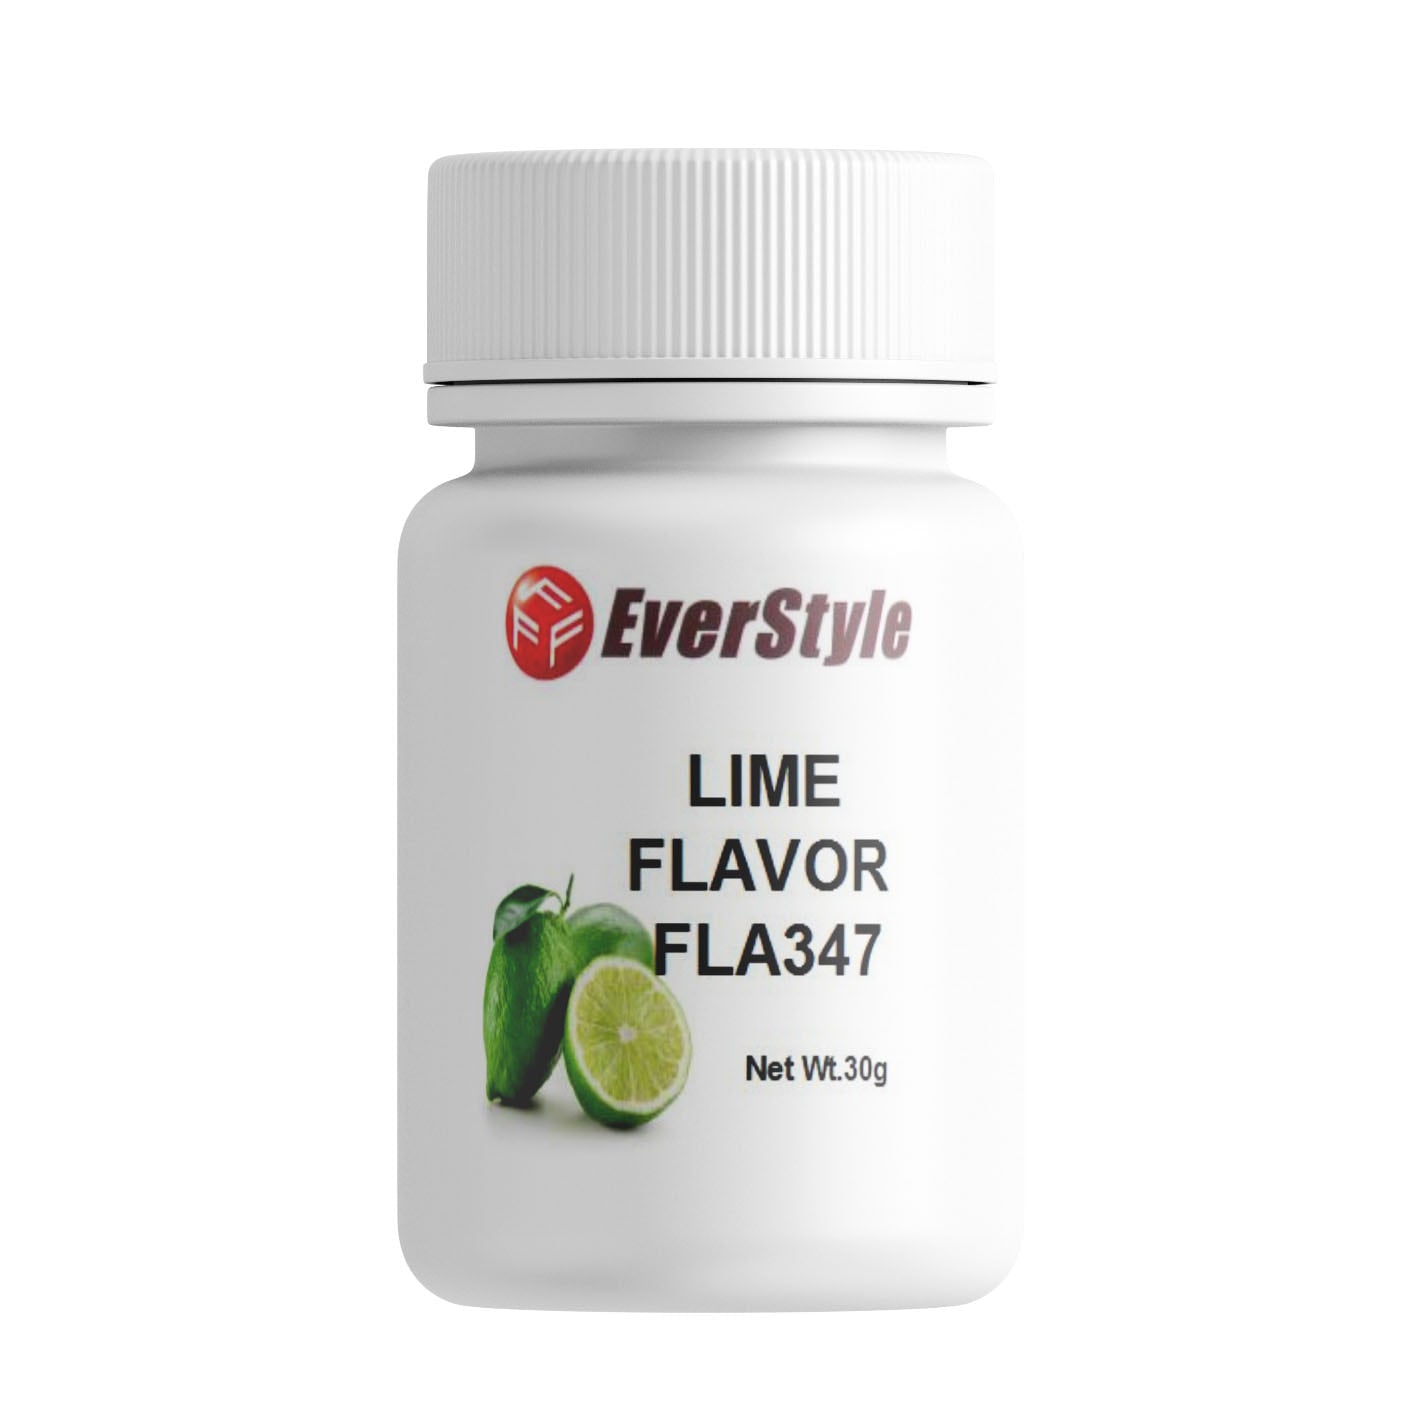 Everstyle Lime Flavor 30g (FLA347) 